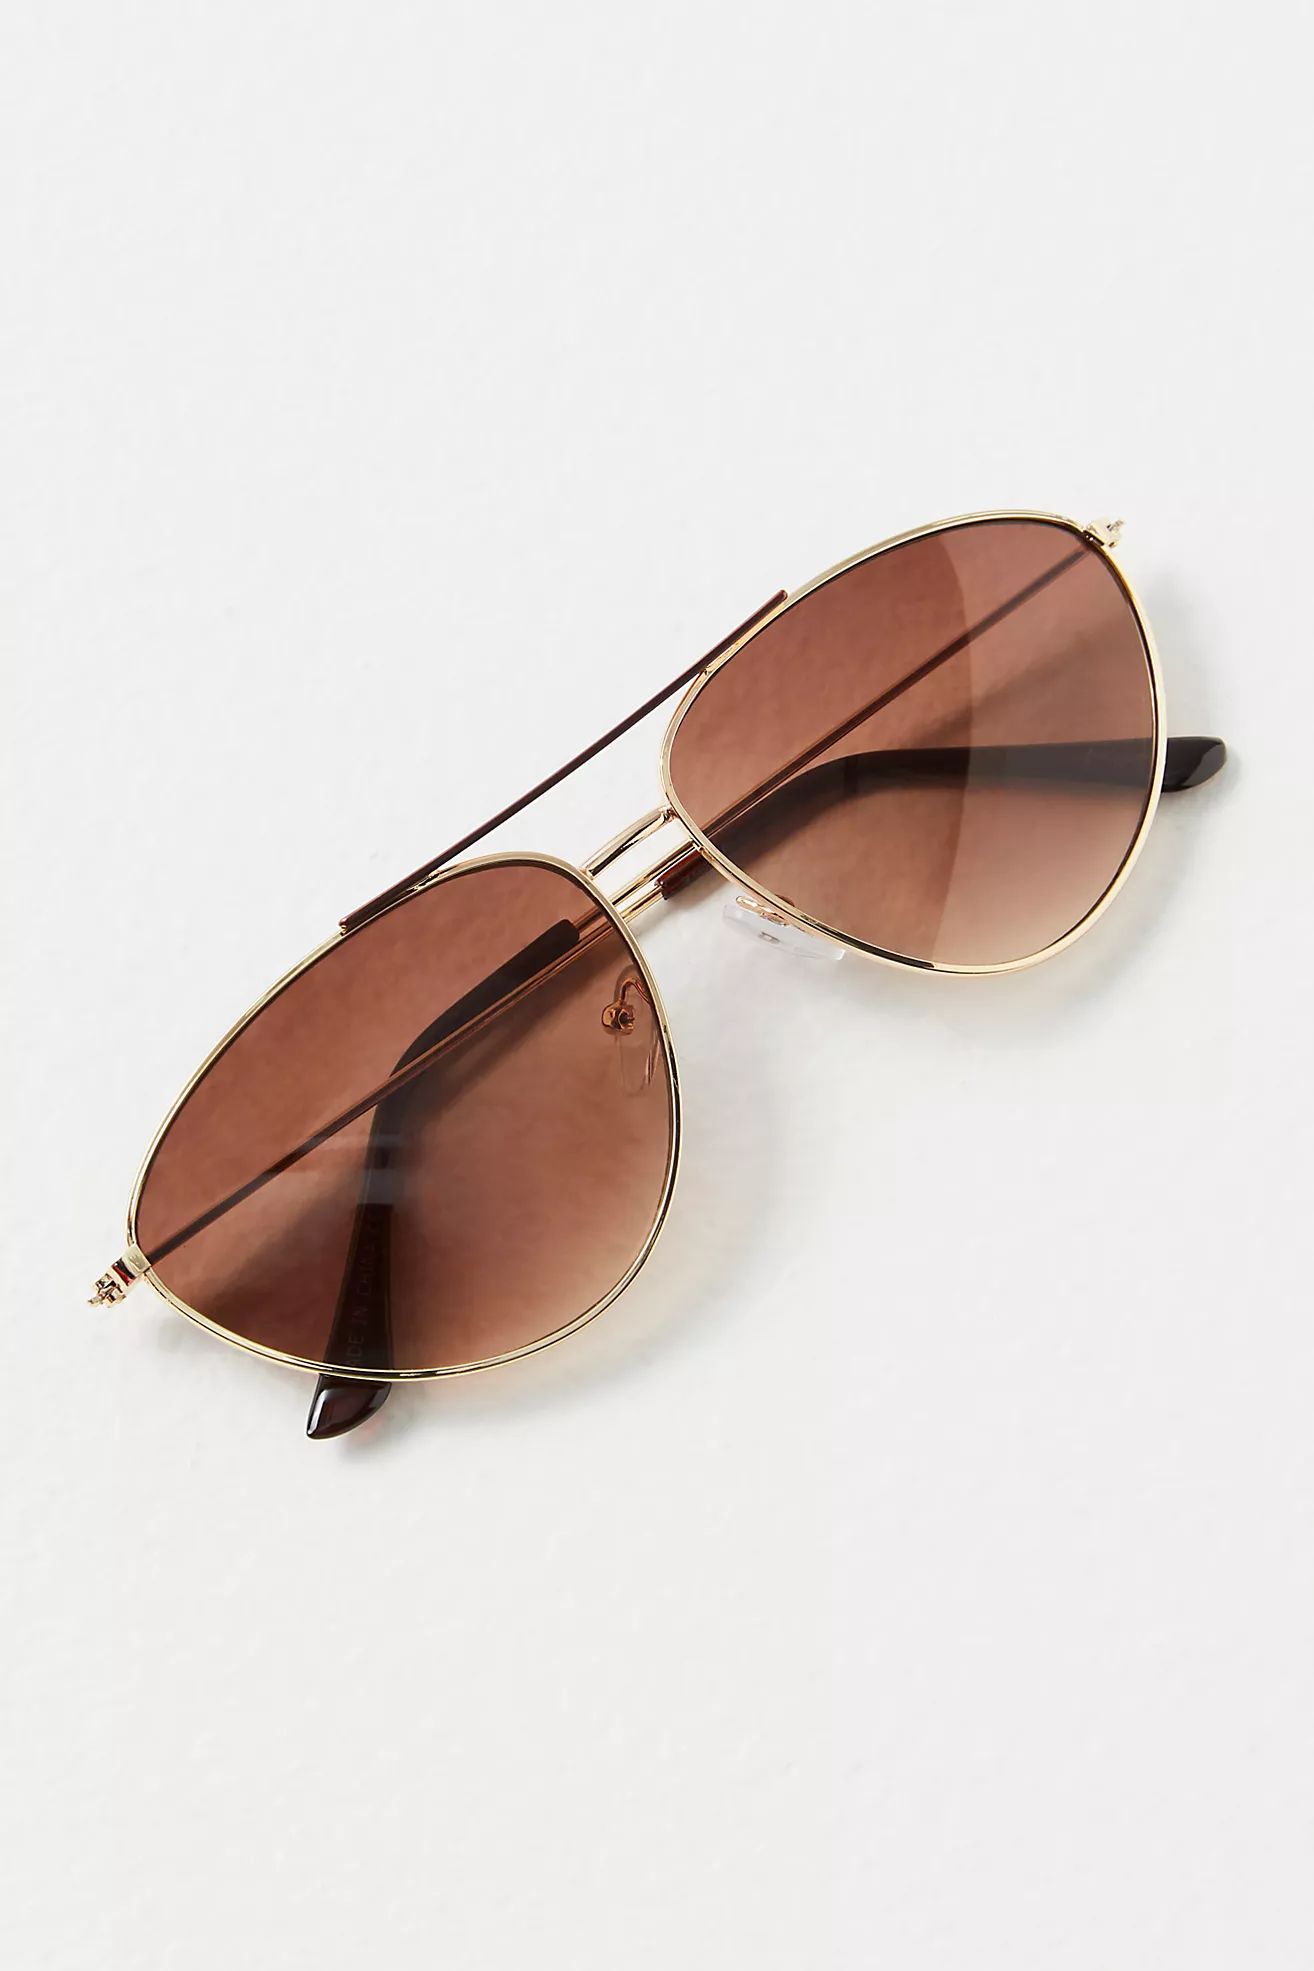 Similar Items

               
            Olympic Cat Eye Sunglasses
            
              ... | Free People (Global - UK&FR Excluded)